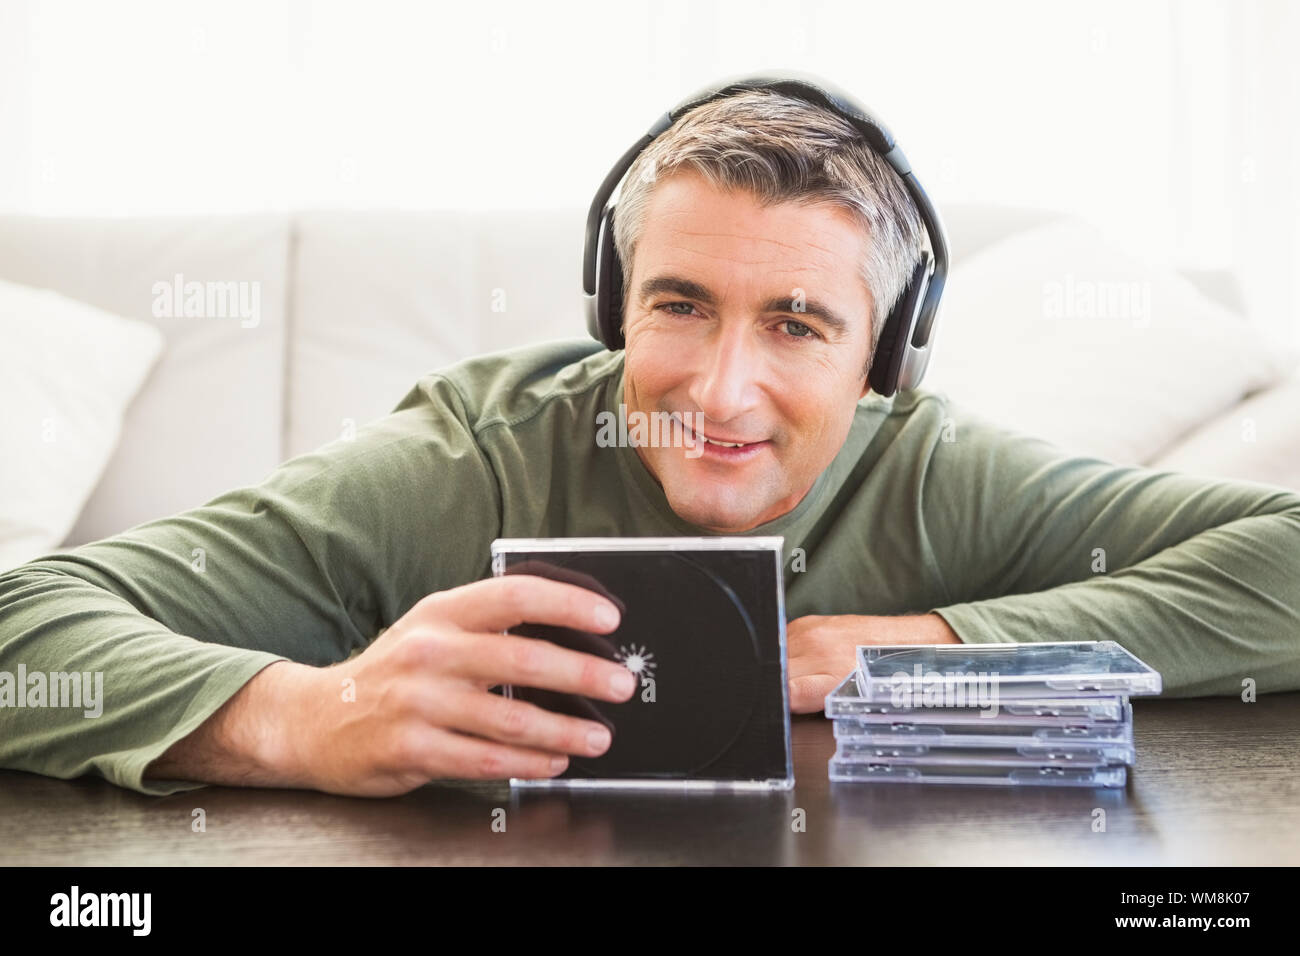 Smiling man listening music and holding cd at home in the living room Stock Photo